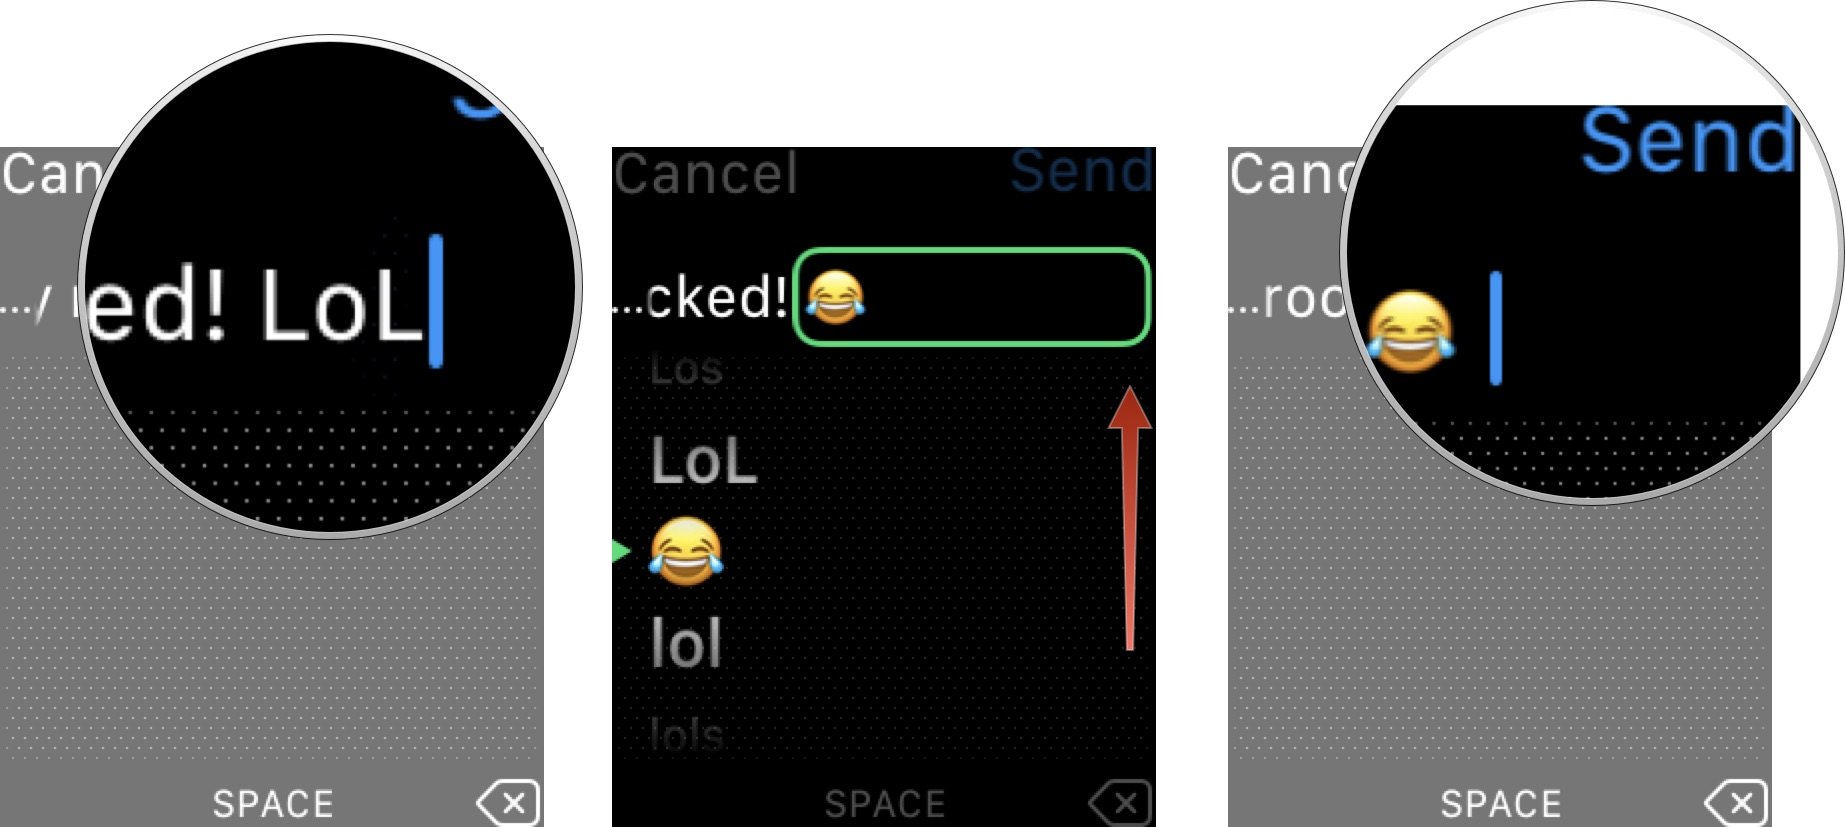 Send Emoji With Scribble On Apple Watch: Type an emoji word, then rotate the Digital Crown, then tap Send